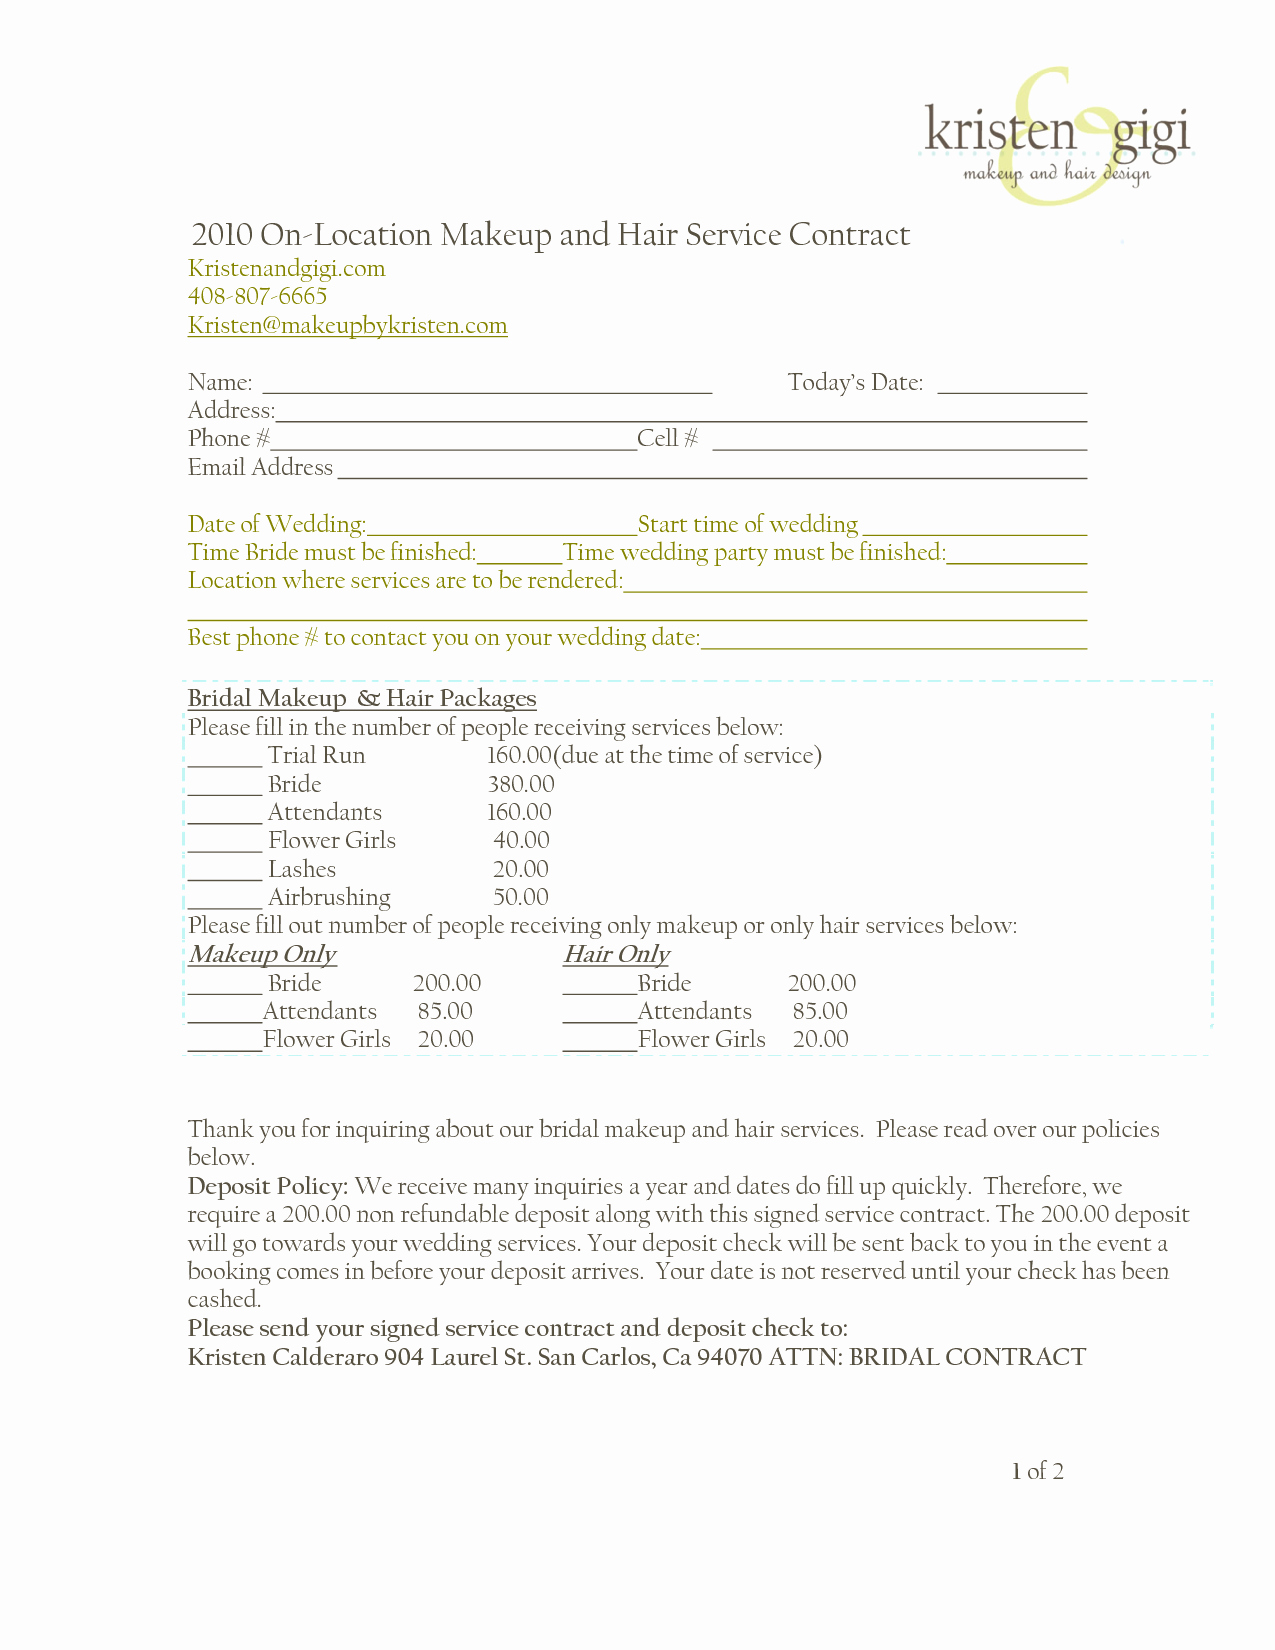 Recording Studio Contract Template Inspirational Bridalhaircotract